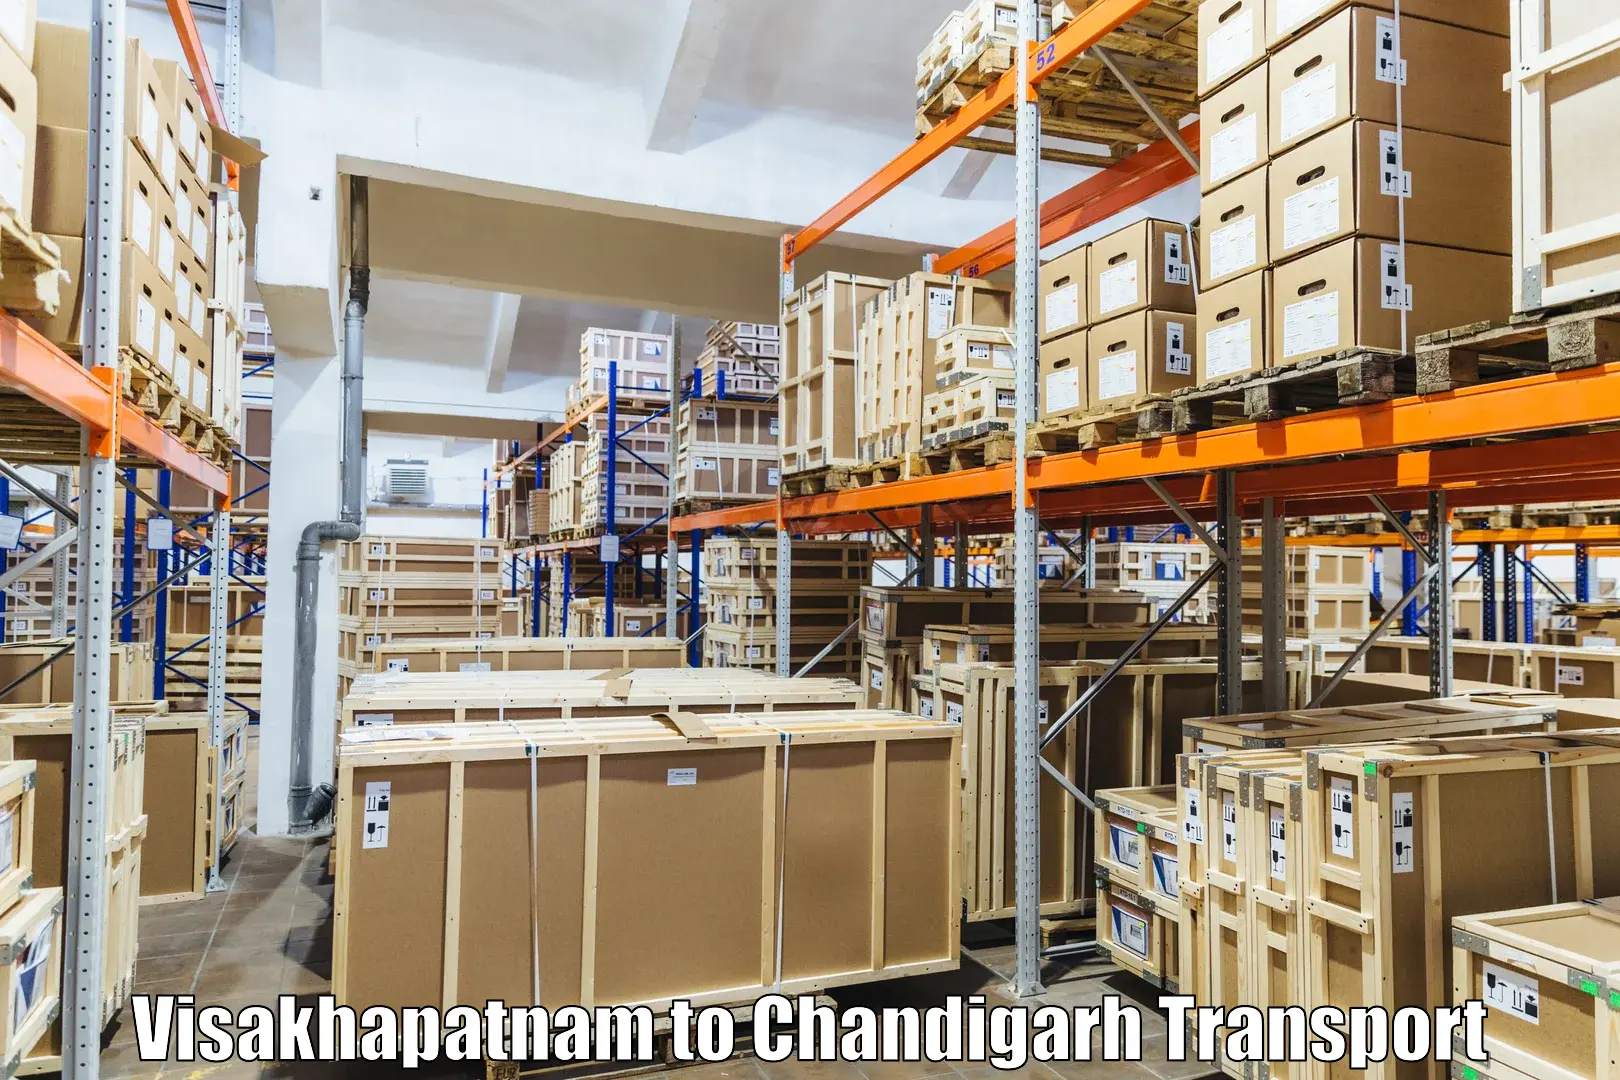 Daily parcel service transport Visakhapatnam to Chandigarh